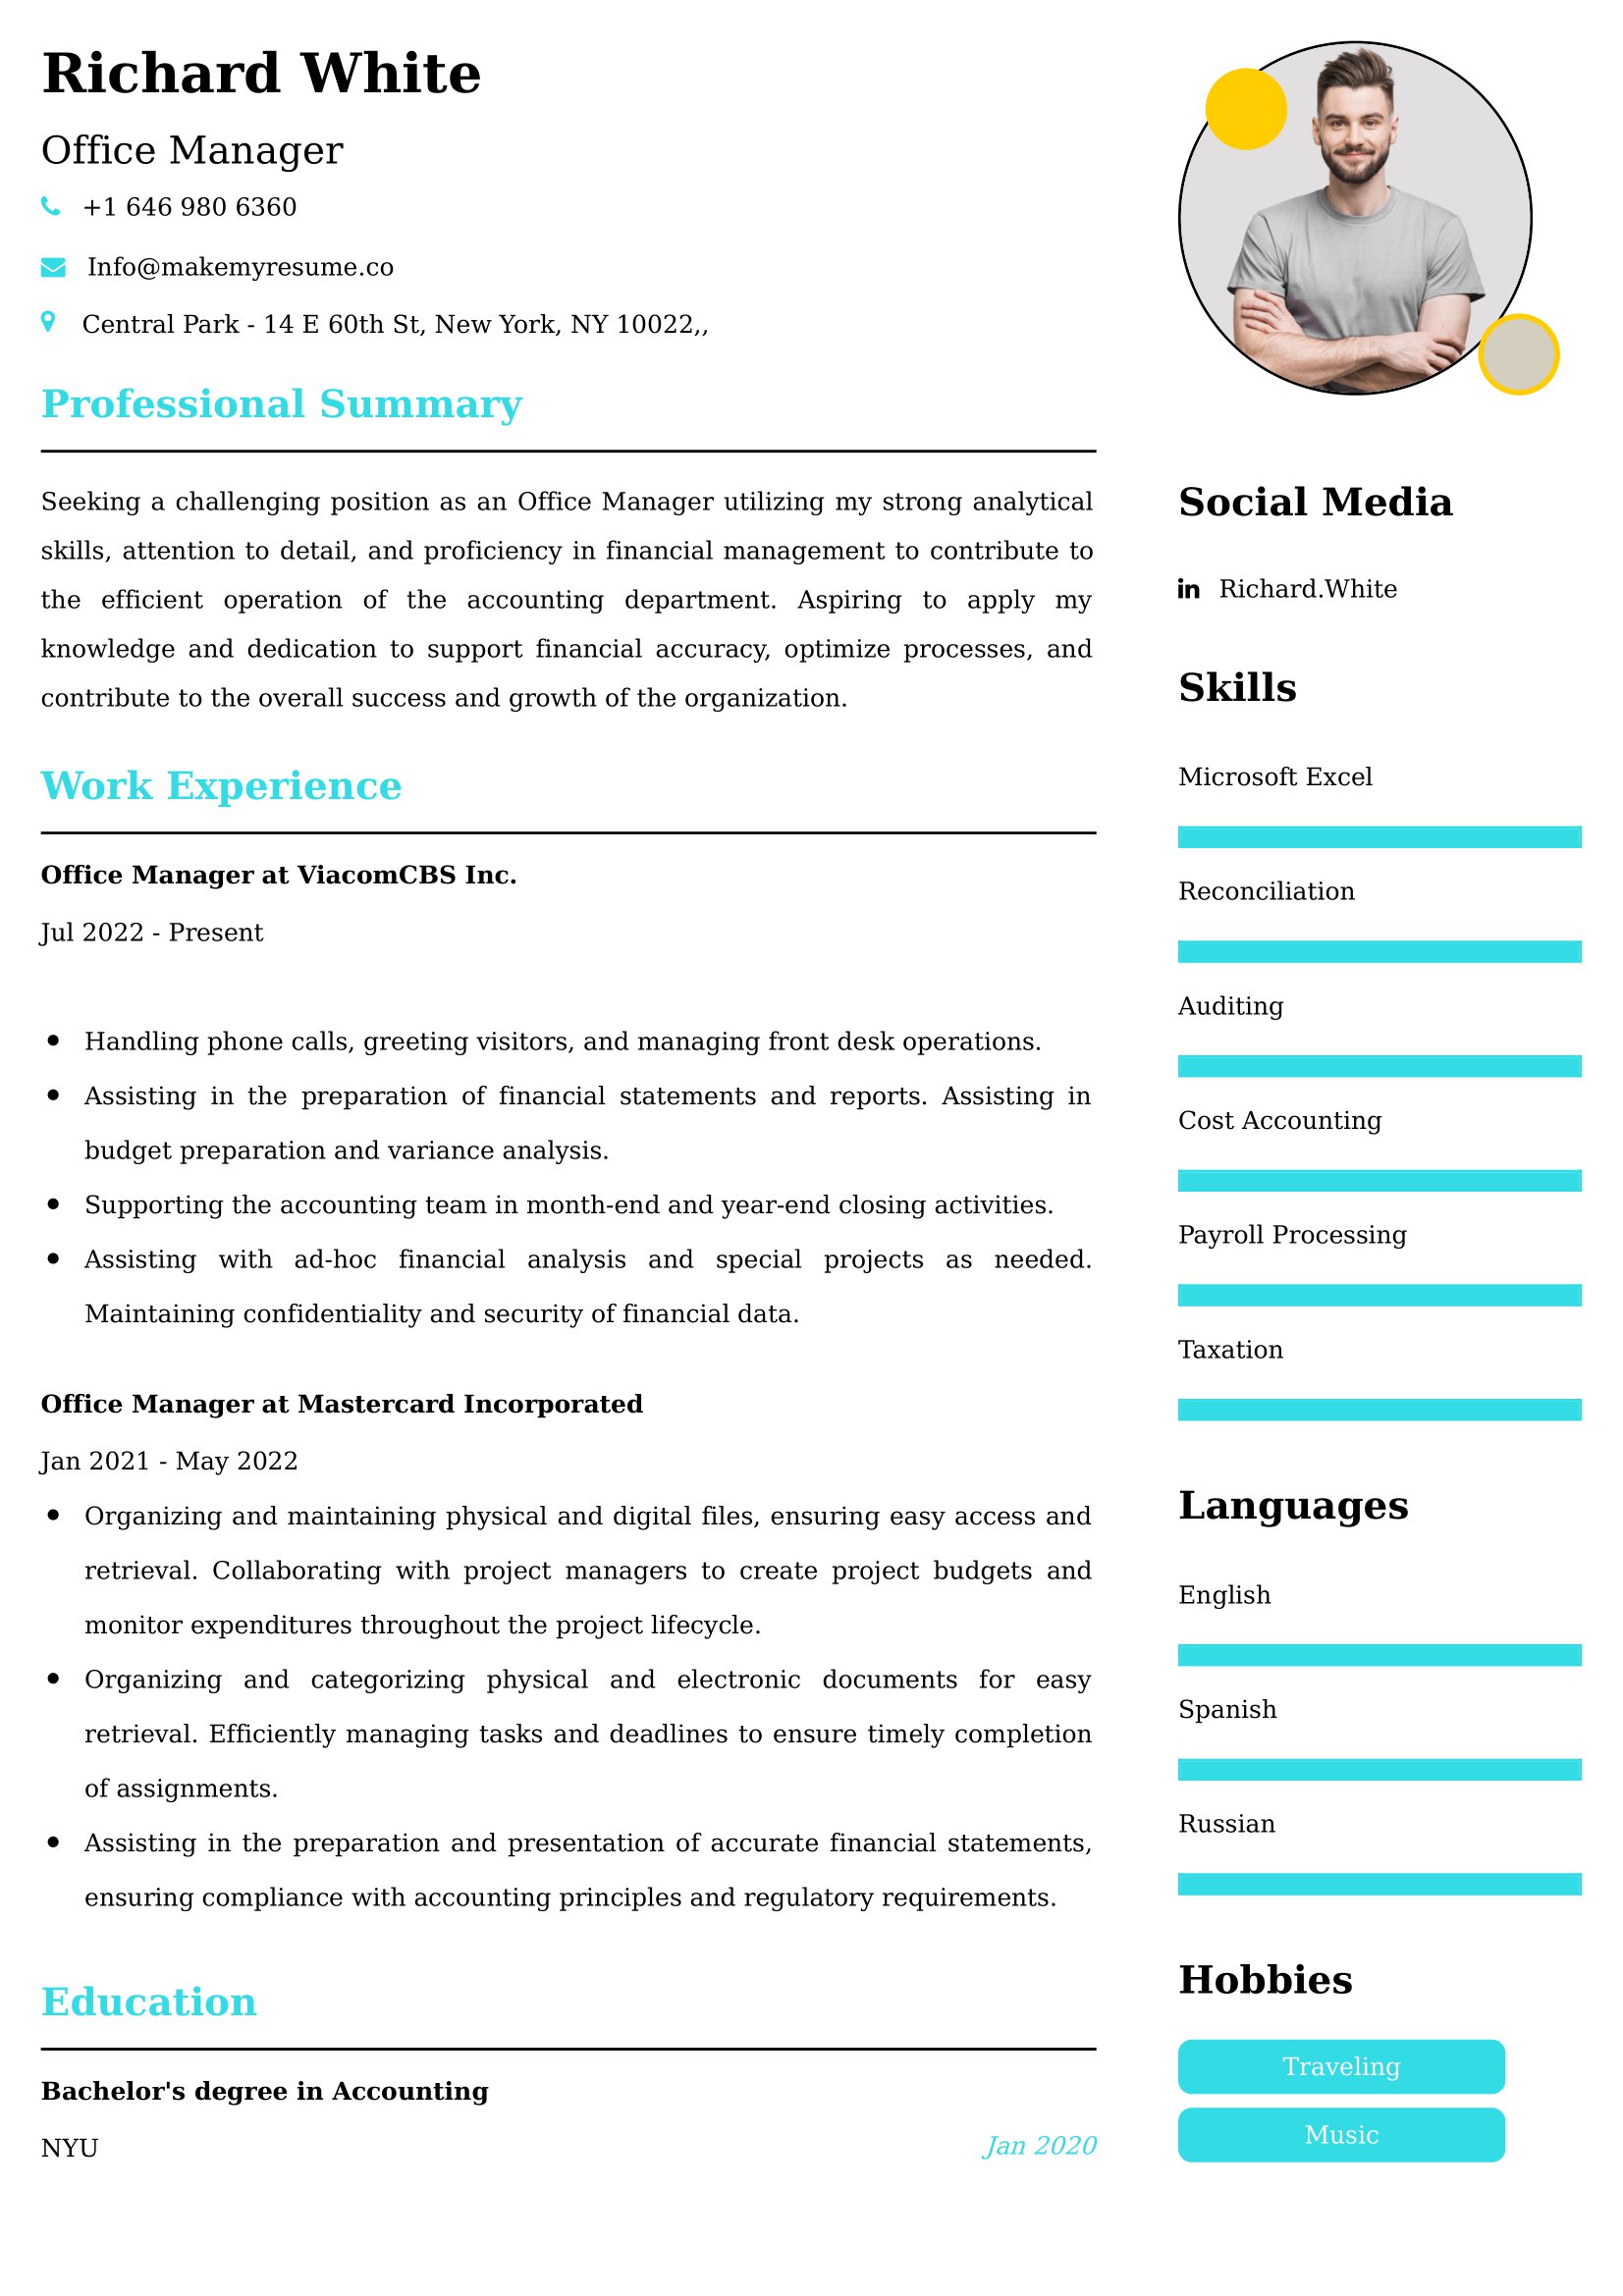 Office Manager Resume Examples for UAE